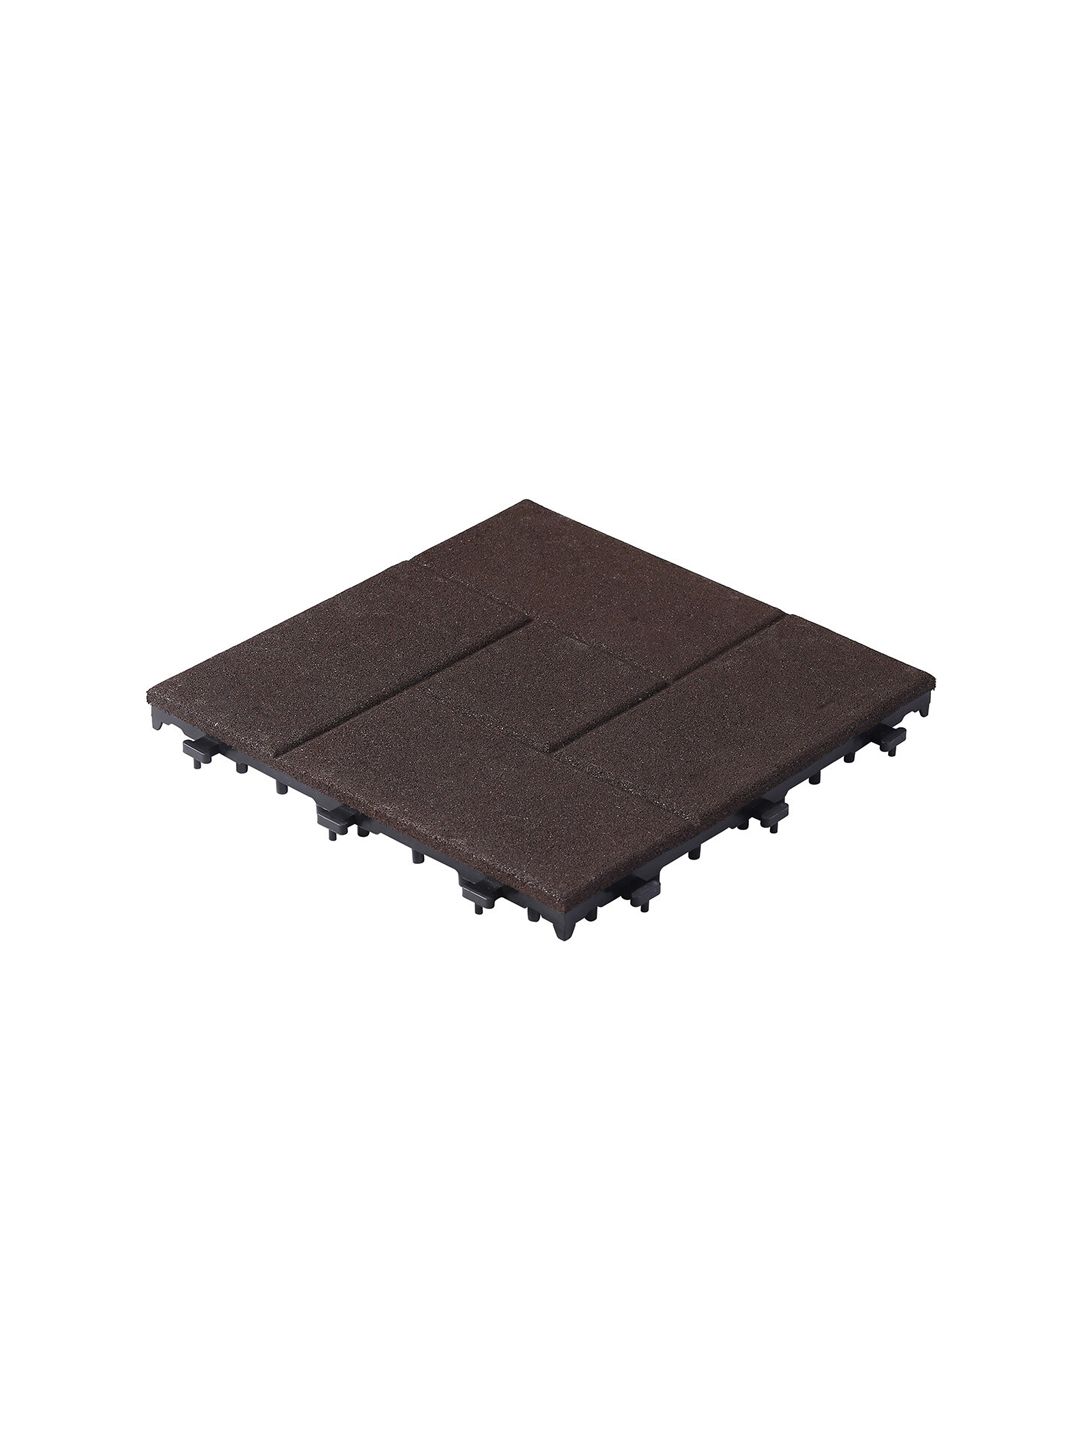 Sharpex Brown Solid Rubber Deck Tiles Price in India